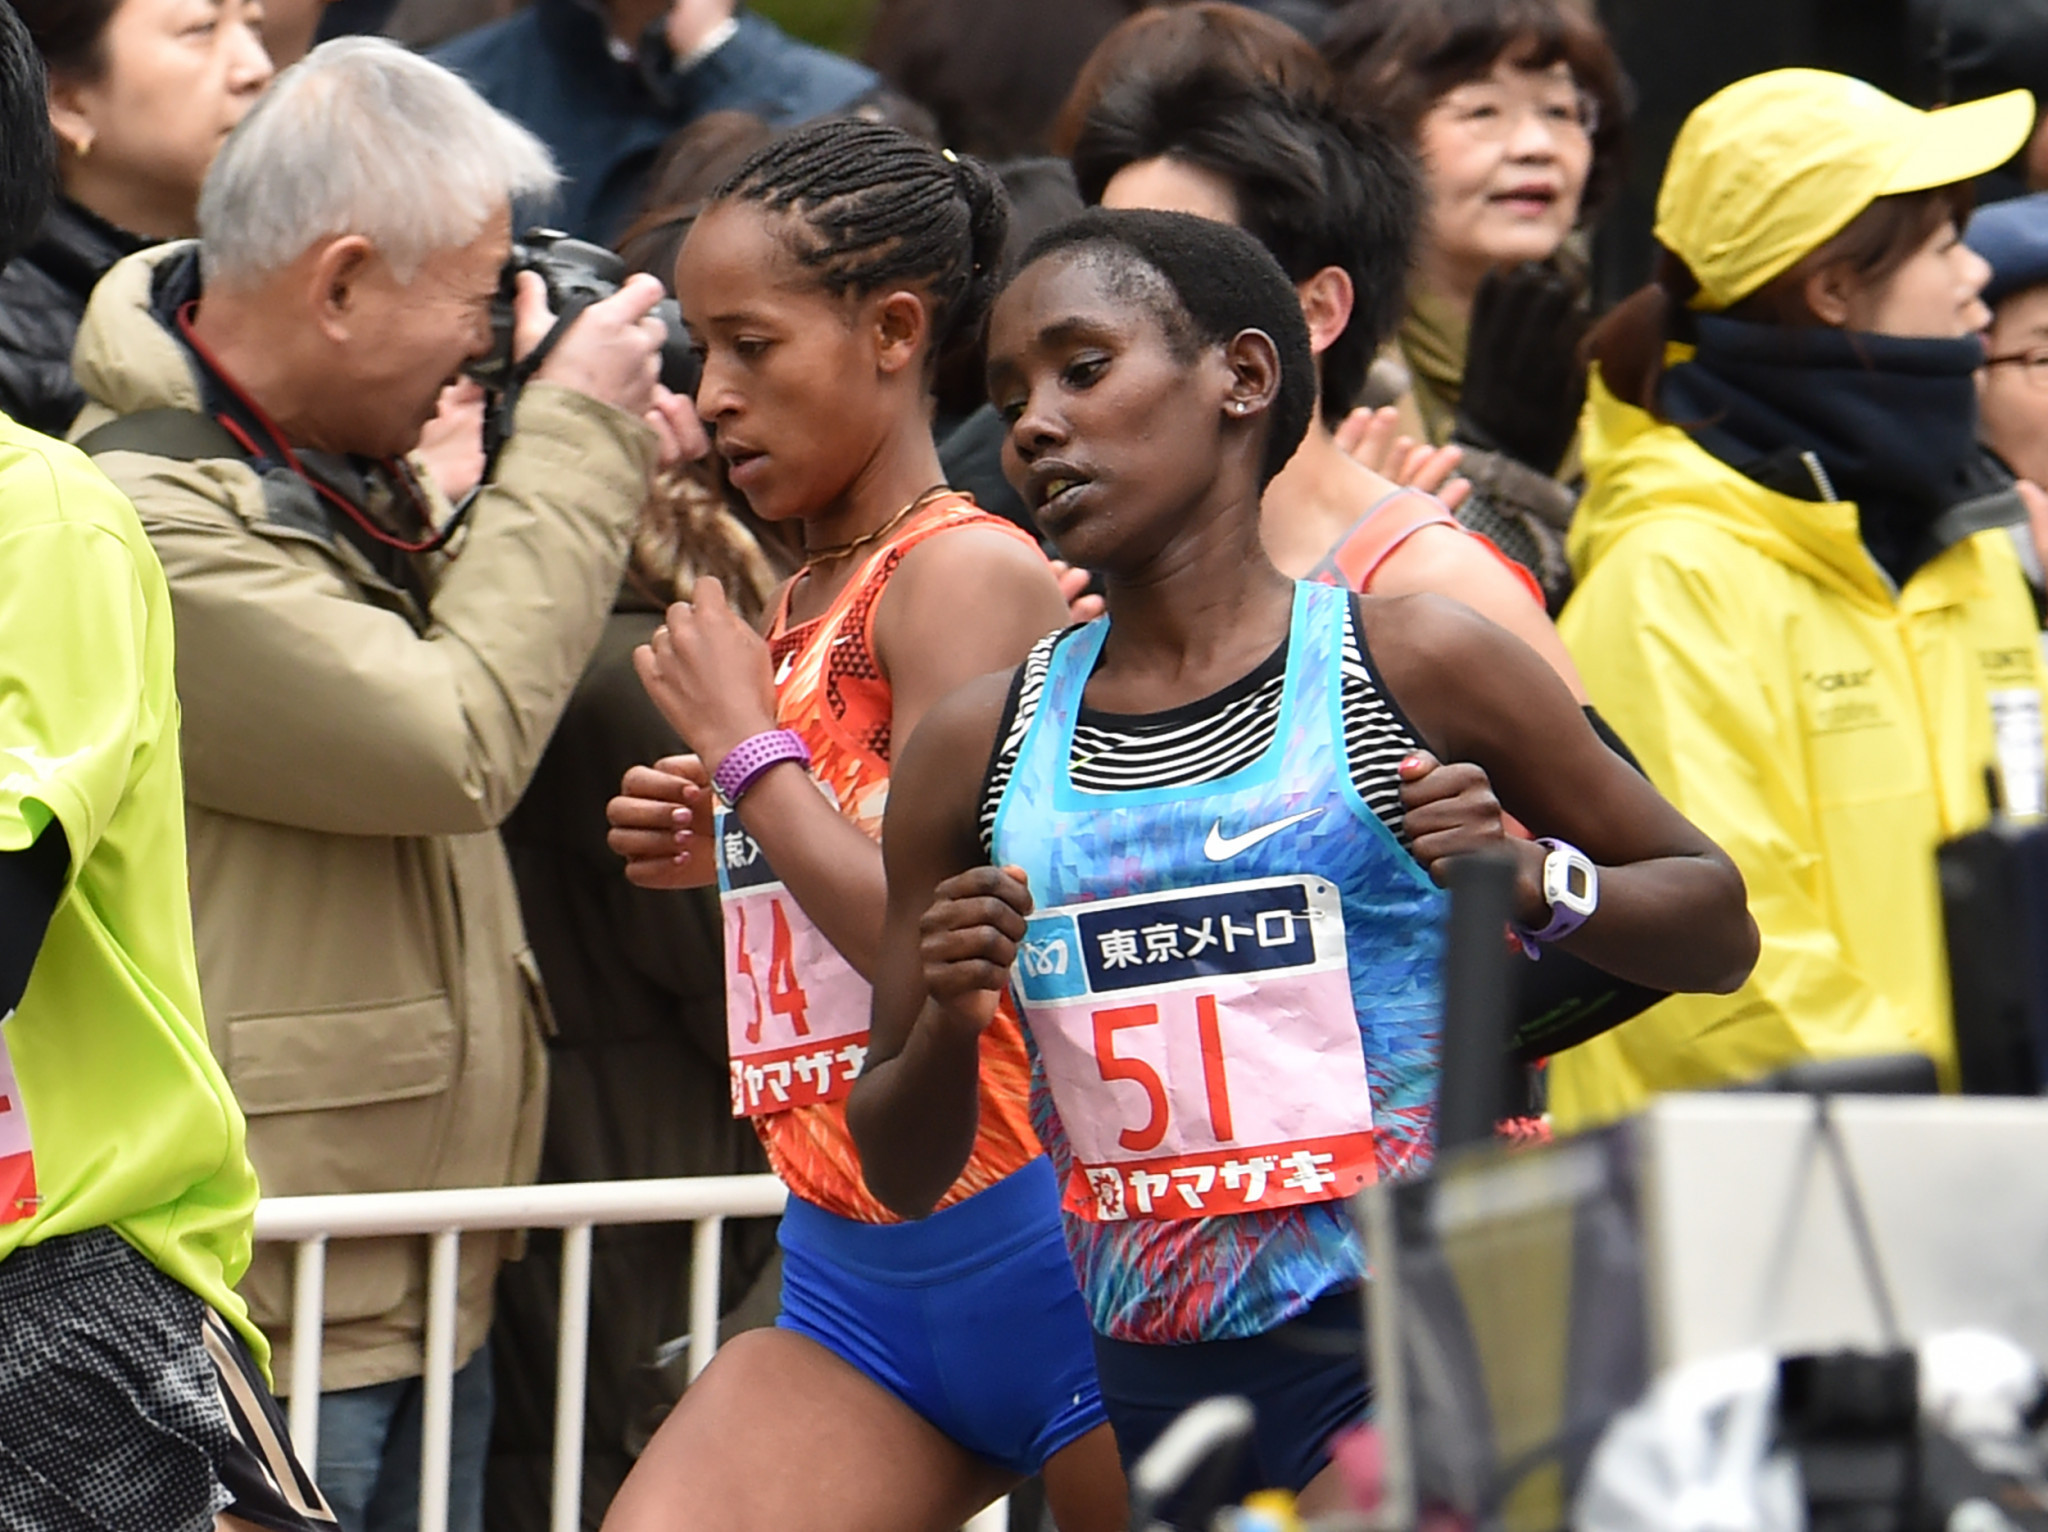 Ethiopia's Ruti Aga, in blue, will be hoping to go one better in the 2019 Tokyo Marathon than she did last year when she finished as the runner-up to her team-mate Birhane Dibaba ©Getty Images